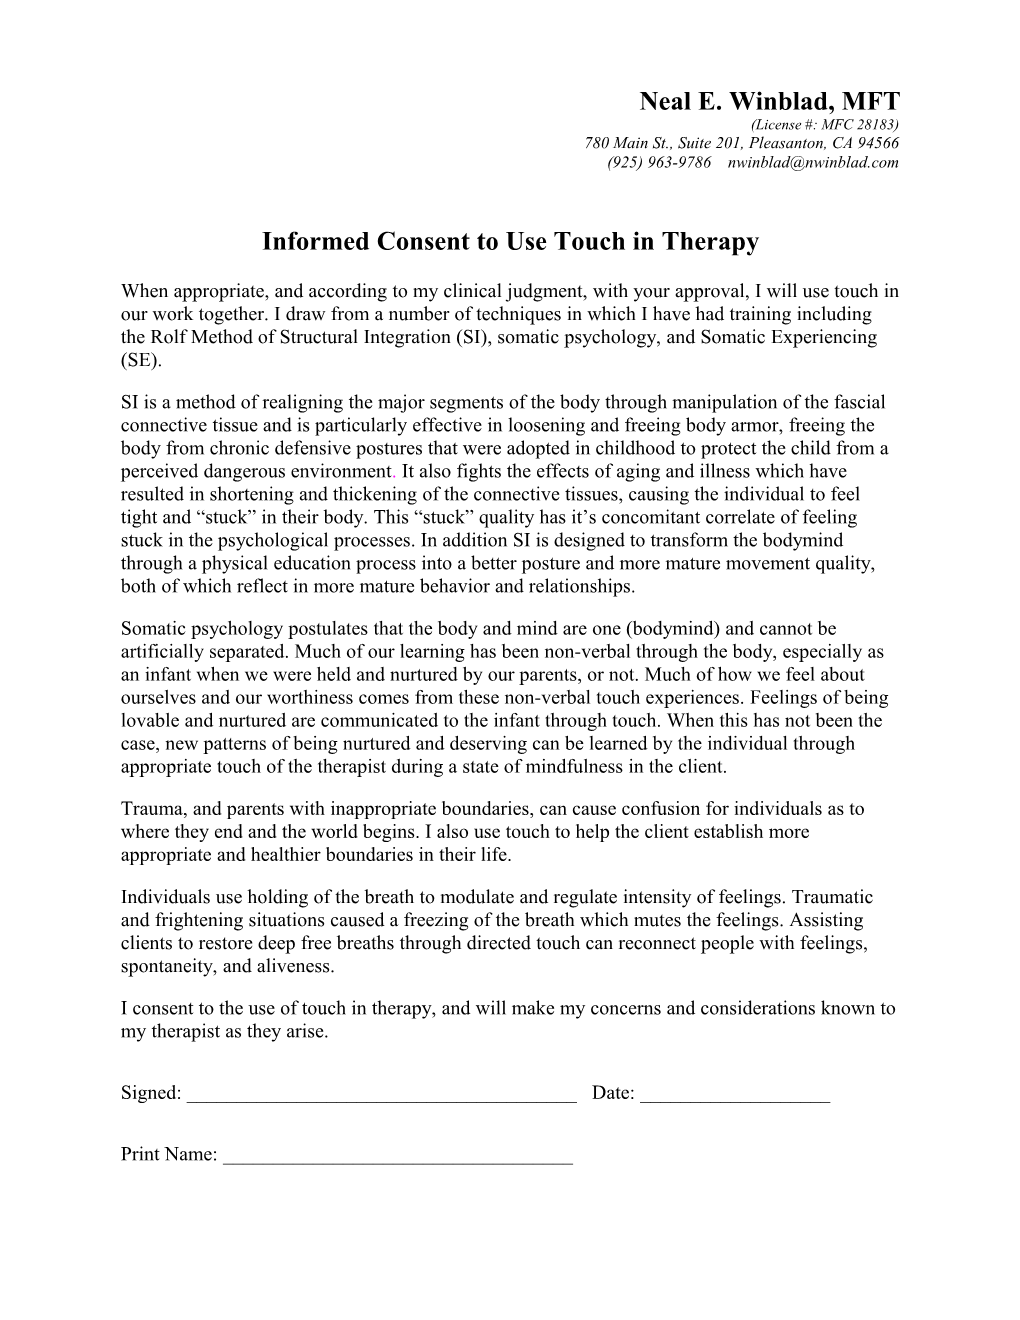 Informed Consent to Use Touch in Therapy